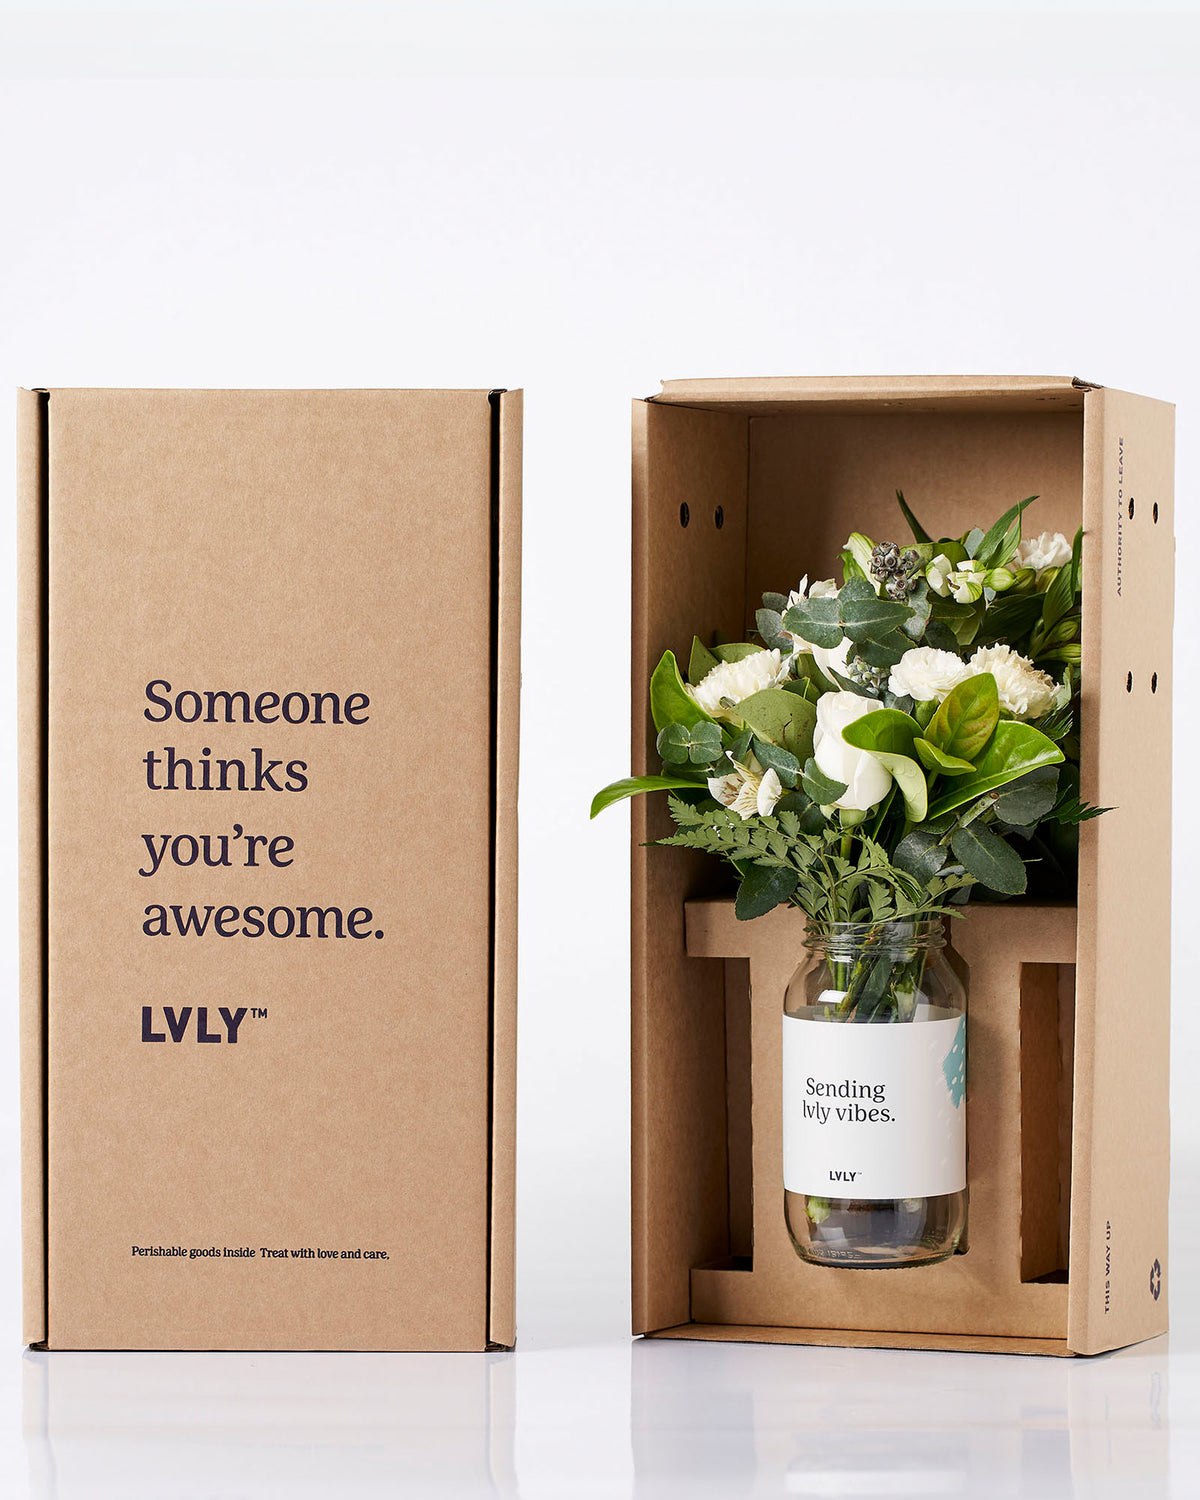 lvly flowers & gifts melbourne